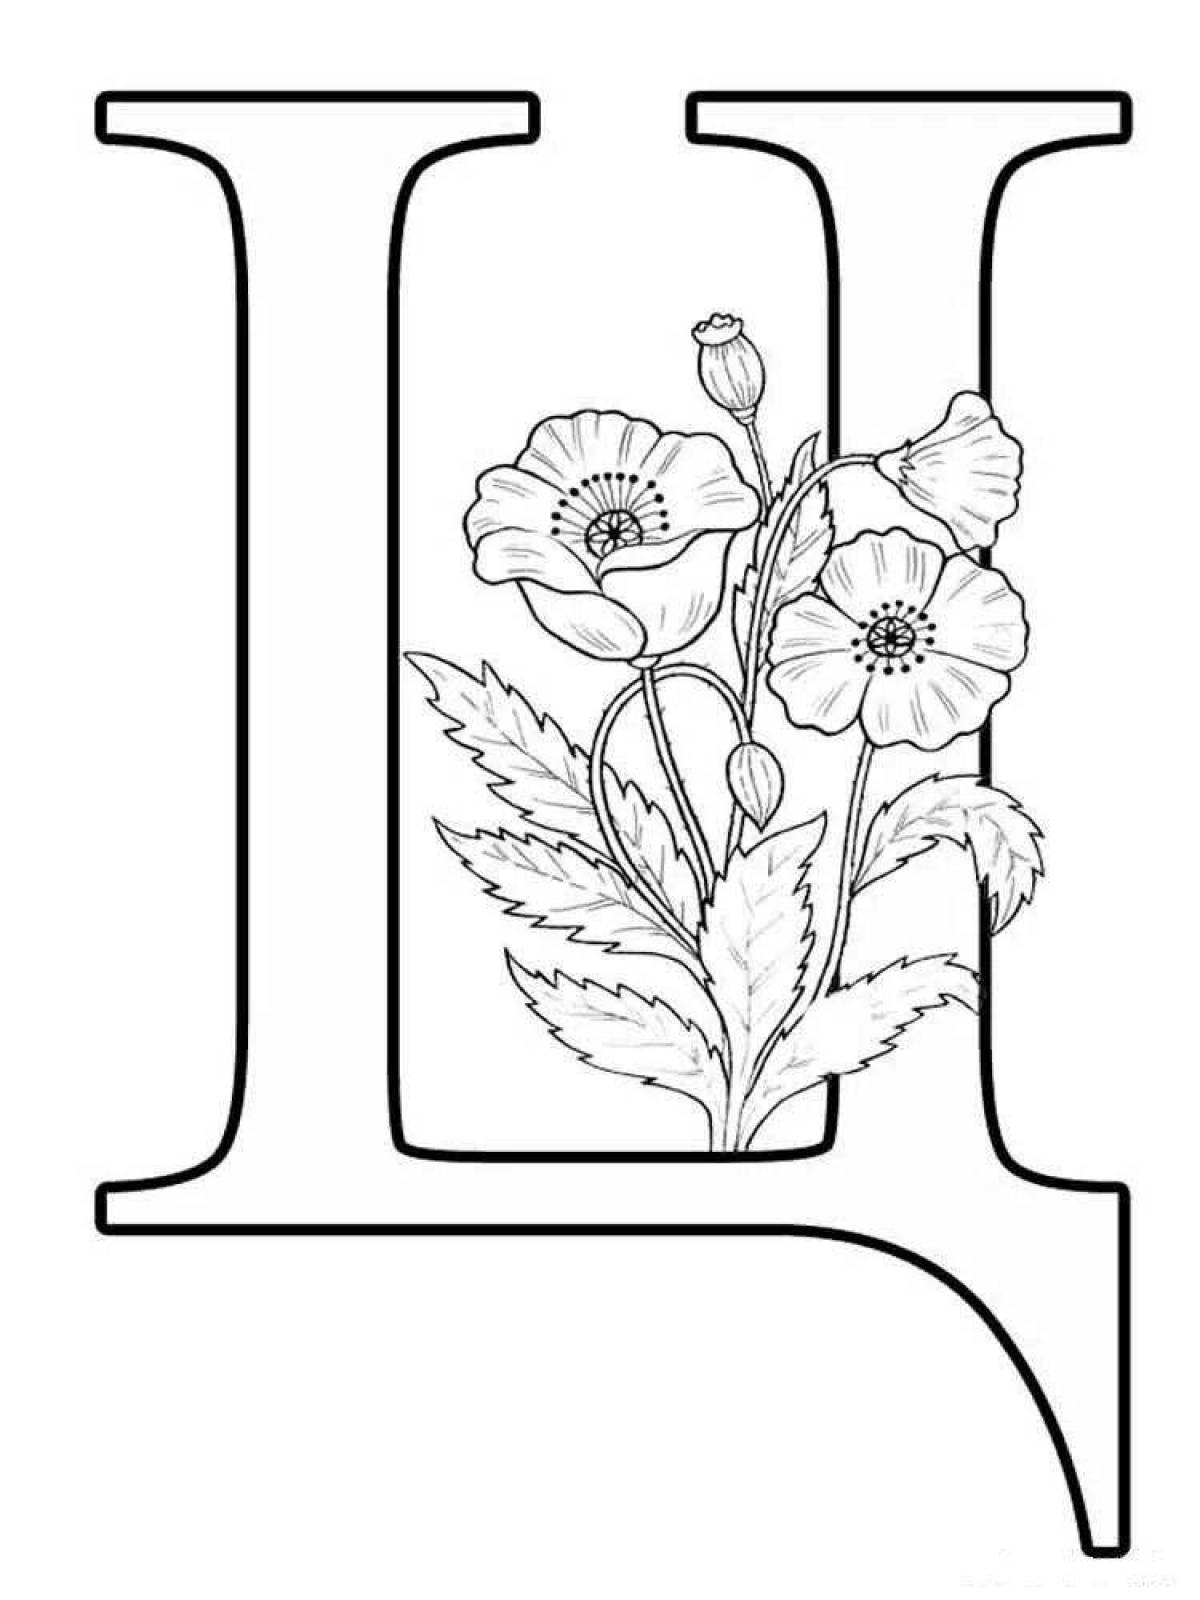 Blinking letter in enchanting coloring page